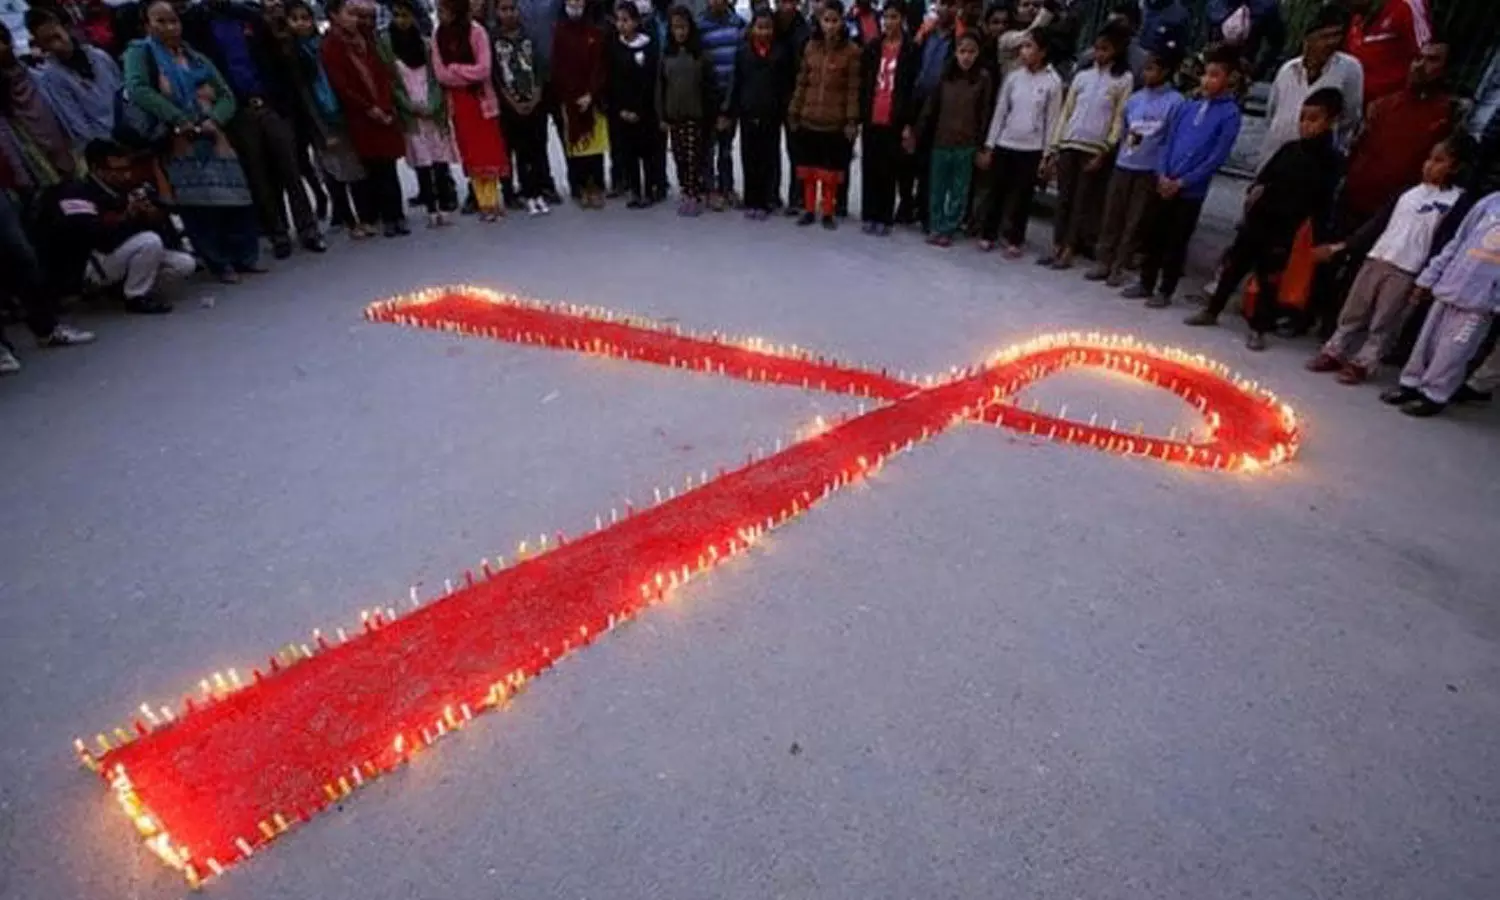 HIV screening should be initiated at age 15 in adolescents, recommends AAP